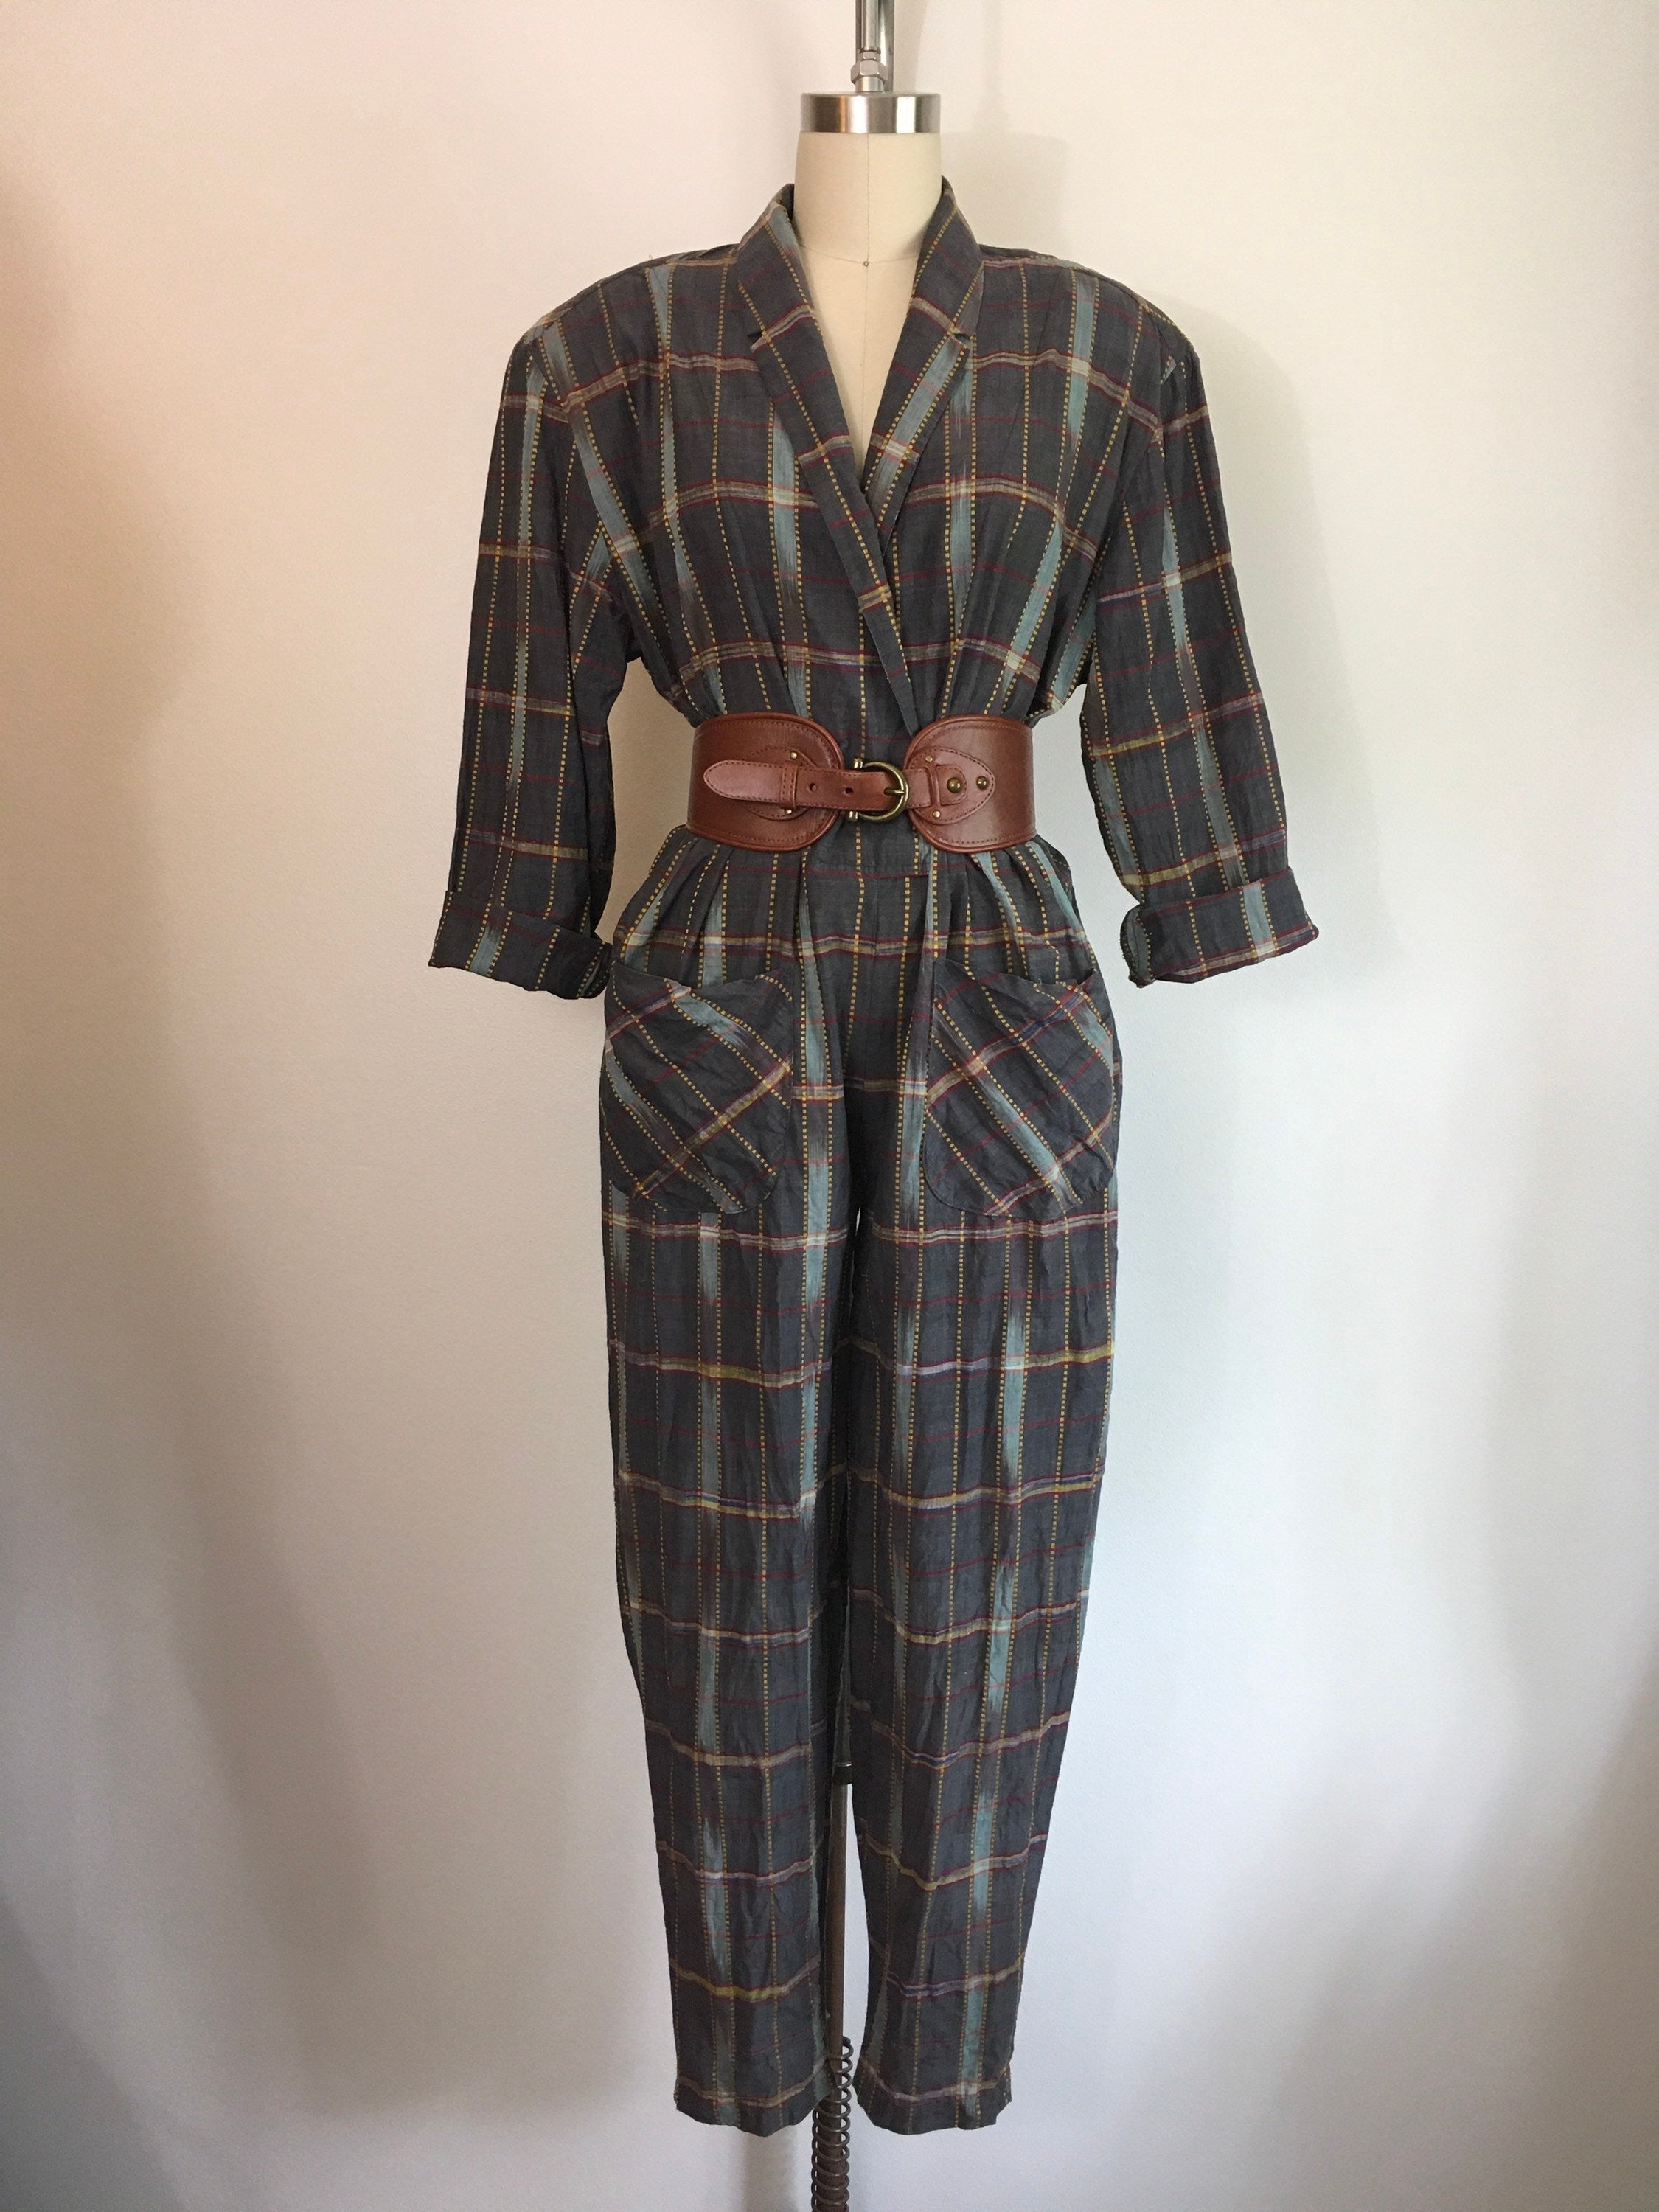 Vintage 80's Gray and Brown Plaid Jumpsuit by Norma Kamali | Shop THRILLING